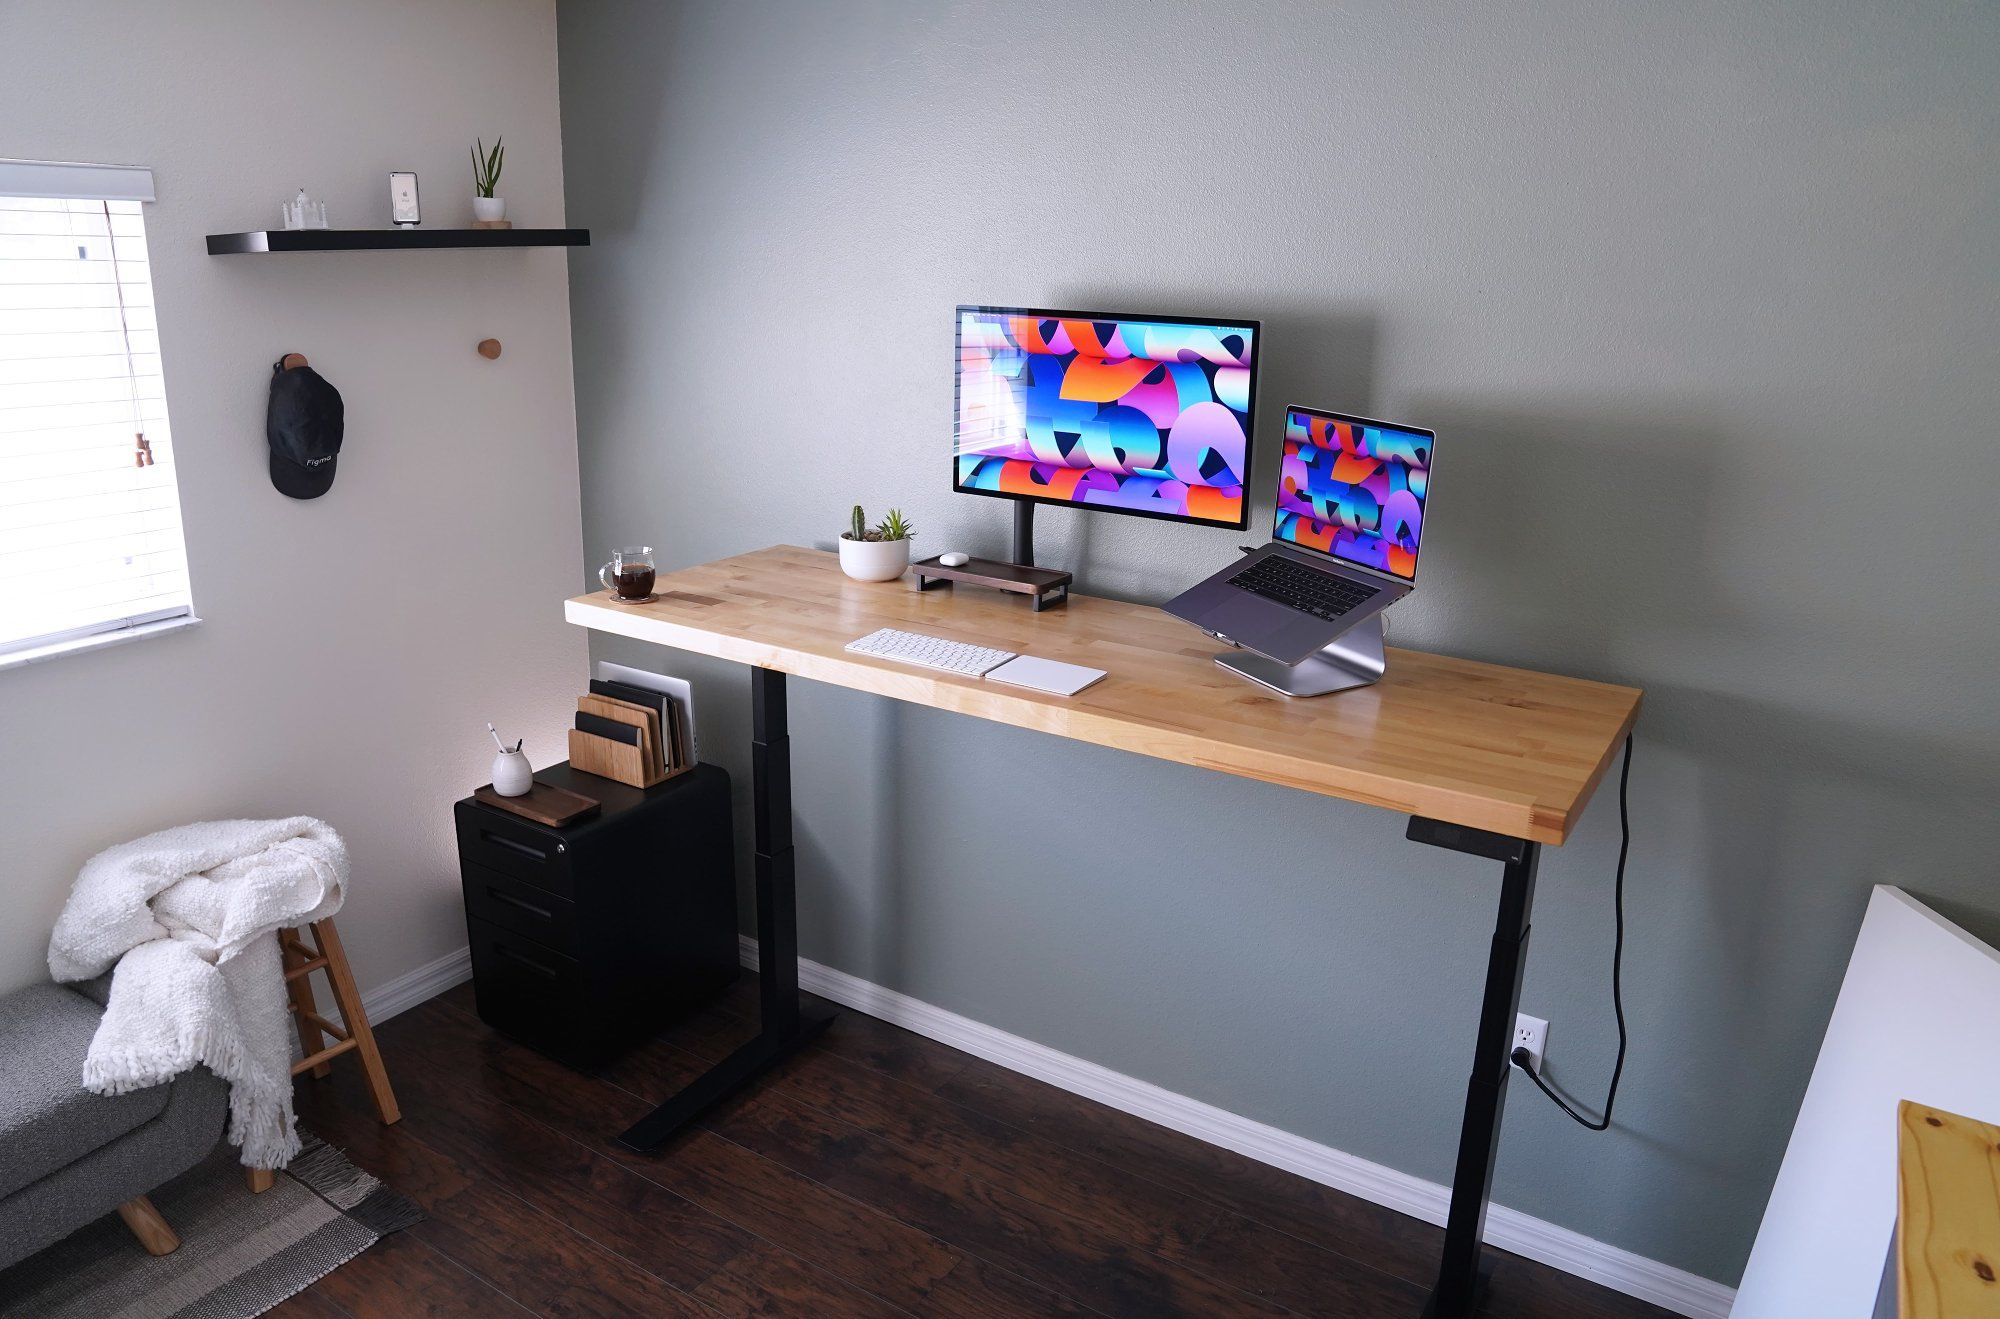 A minimalist workspace with a large wooden desk, single monitor, laptop on a stand, an armchair with a throw, and decorative floating shelf in a room with grey walls